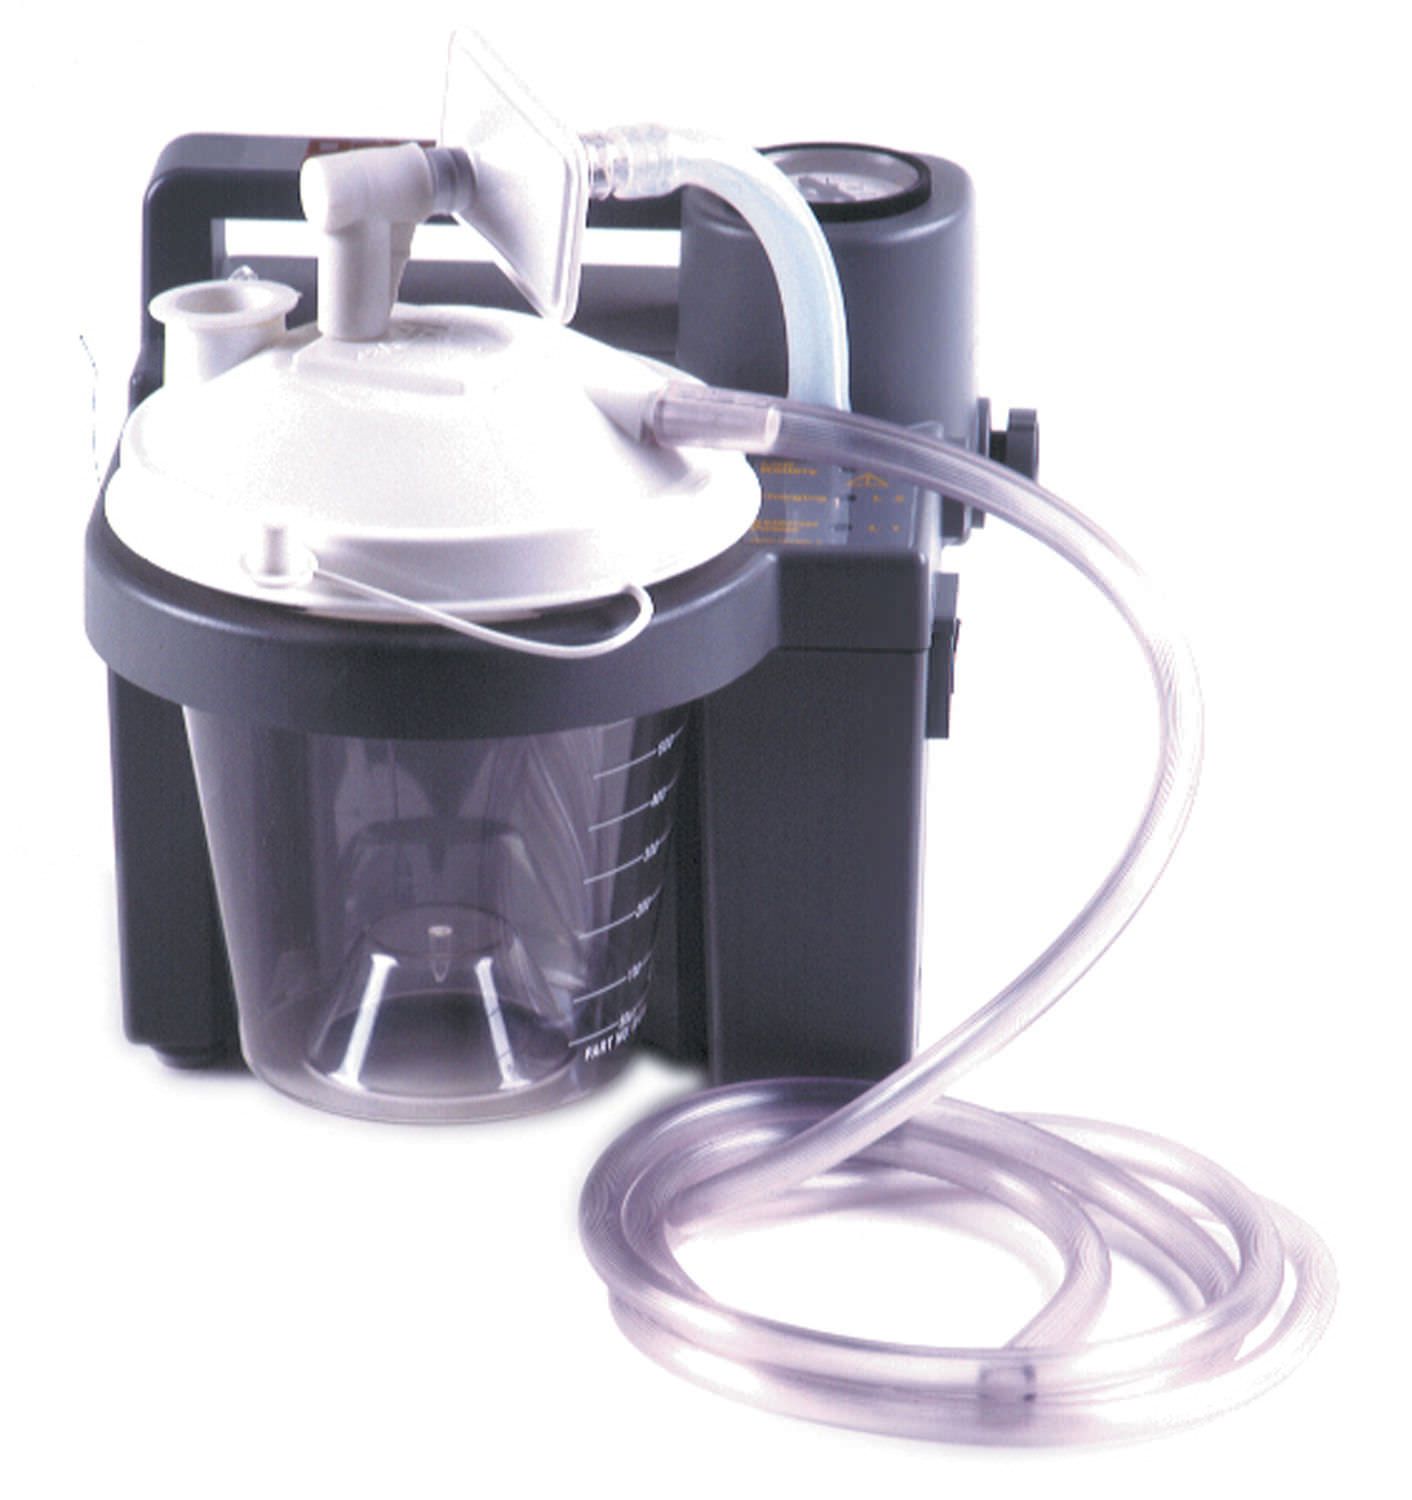 Electric mucus suction pump / handheld / for home use 27 L/mn | DeVilbiss 7305 series DeVilbiss Healthcare